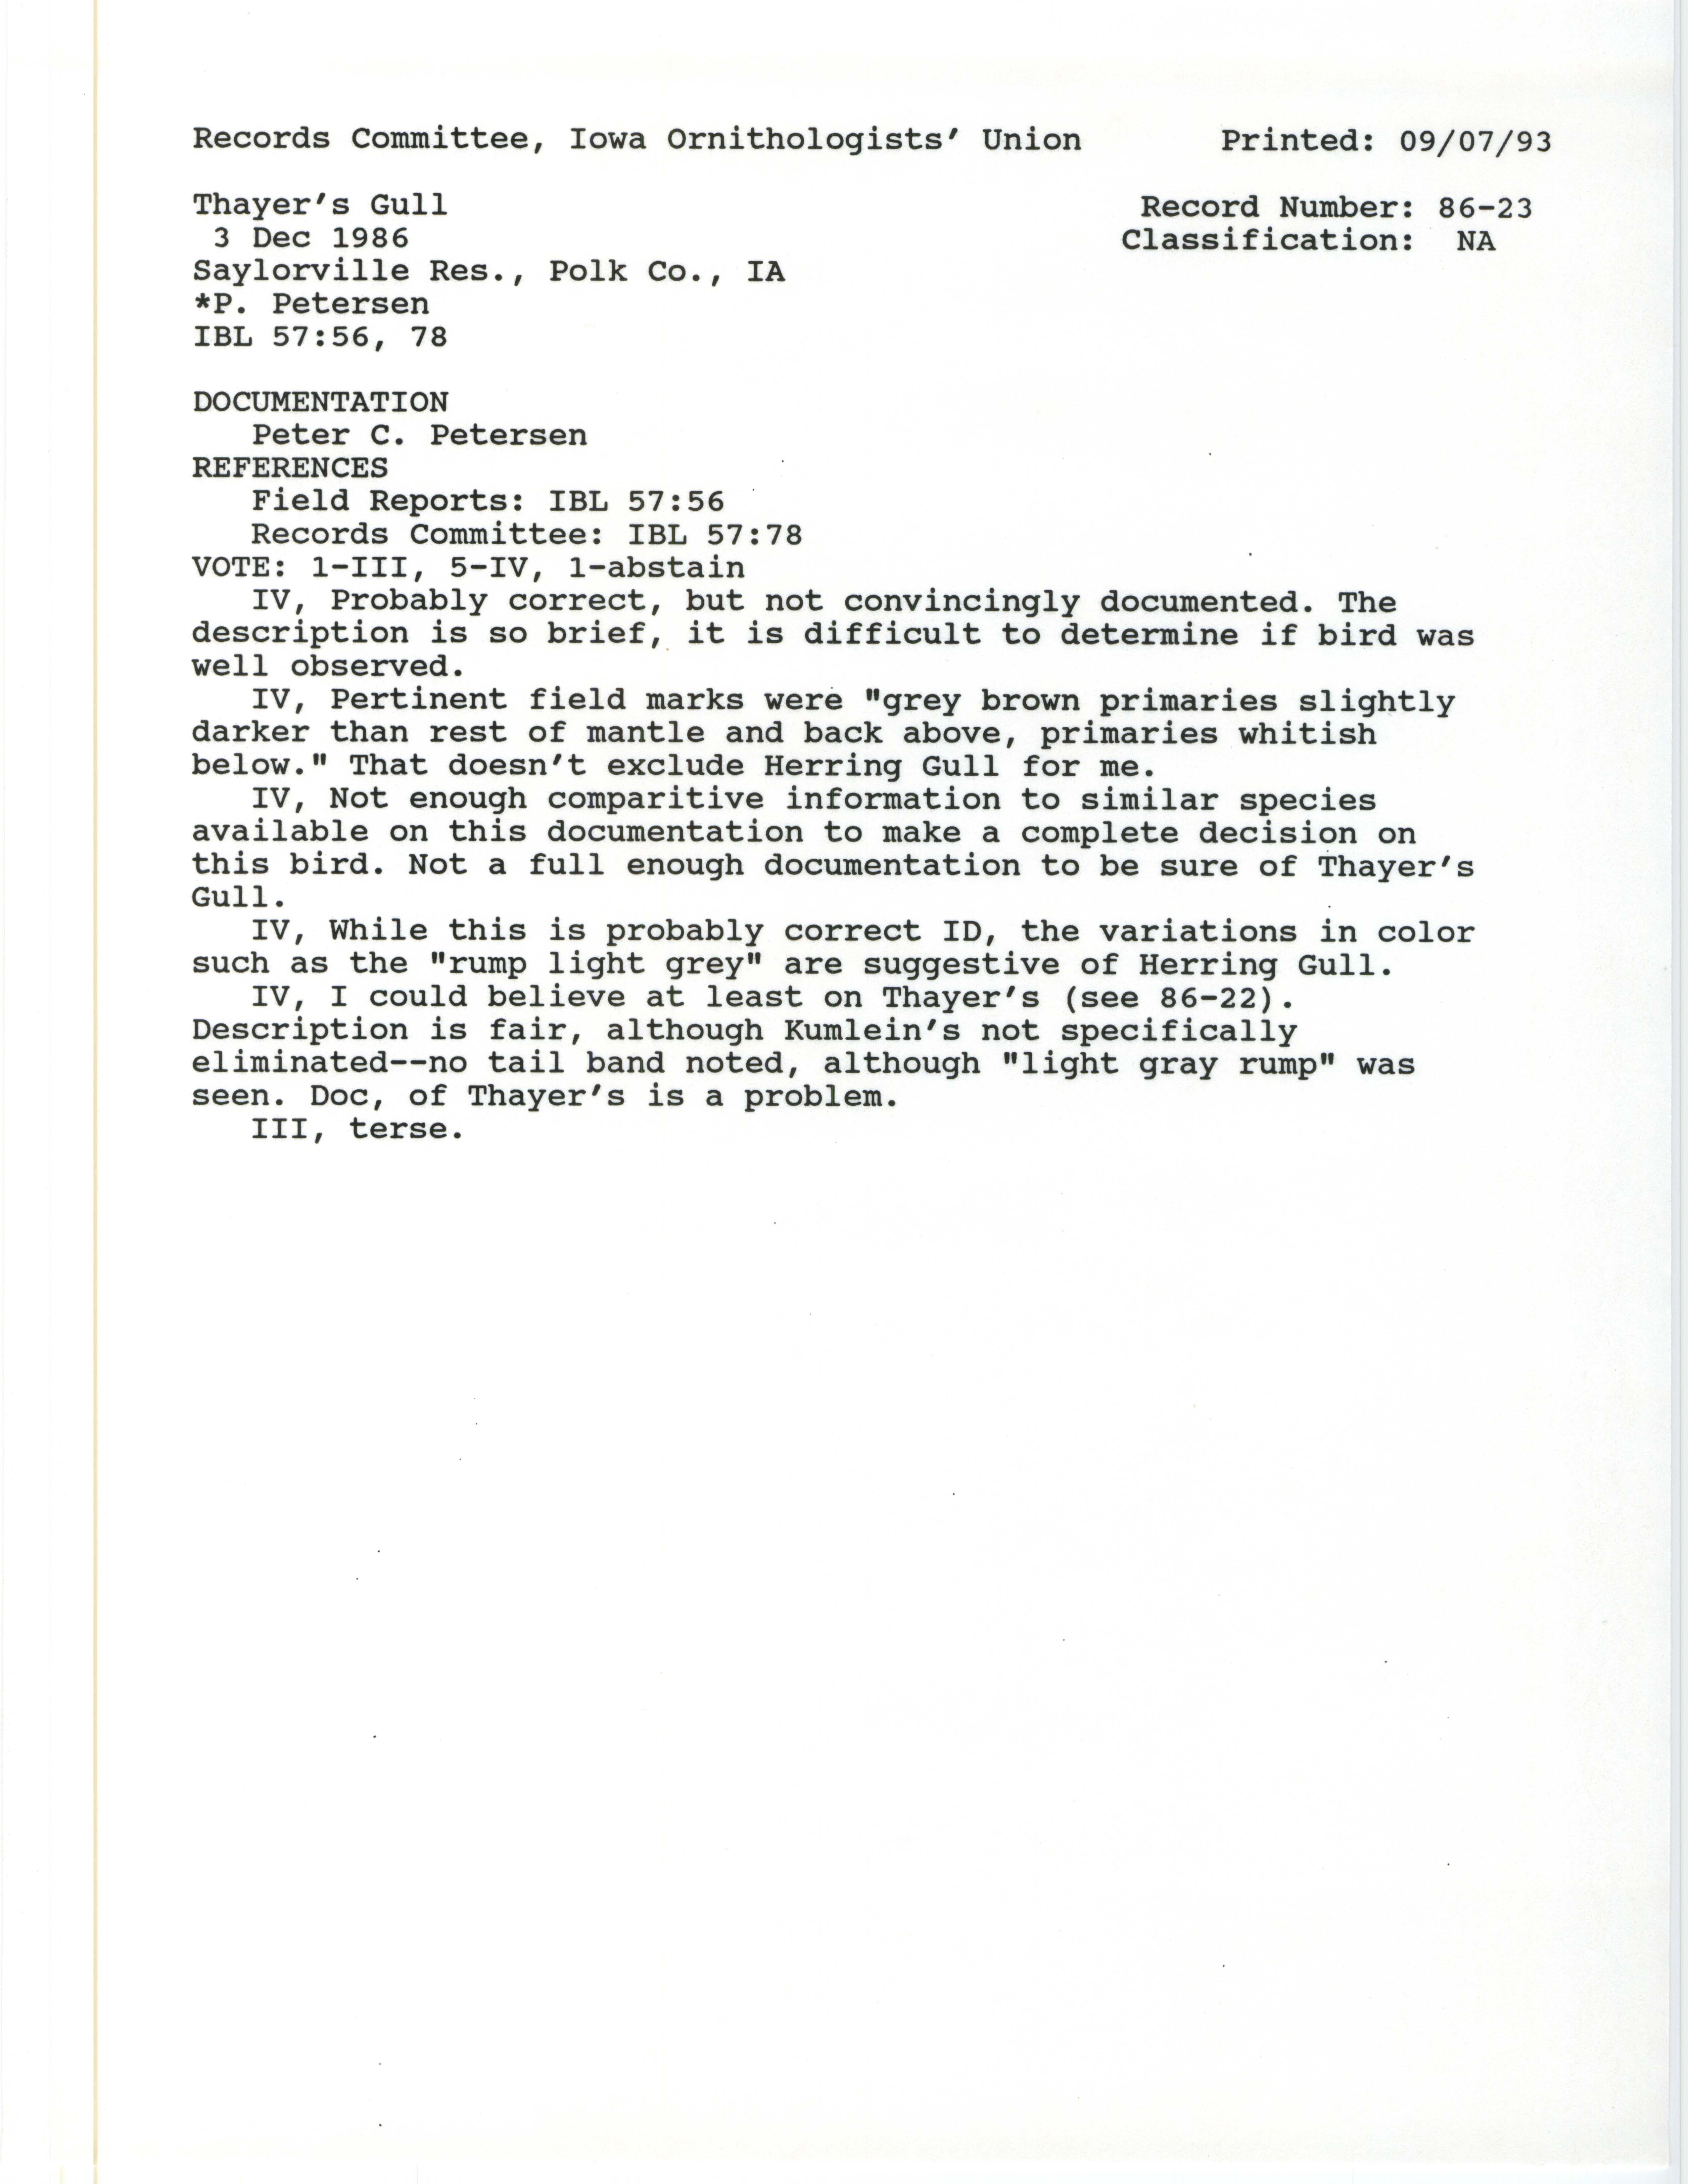 Records Committee review for rare bird sighting of Thayer's Gull at Cottonwood Recreation Area near Saylorville Dam, 1986